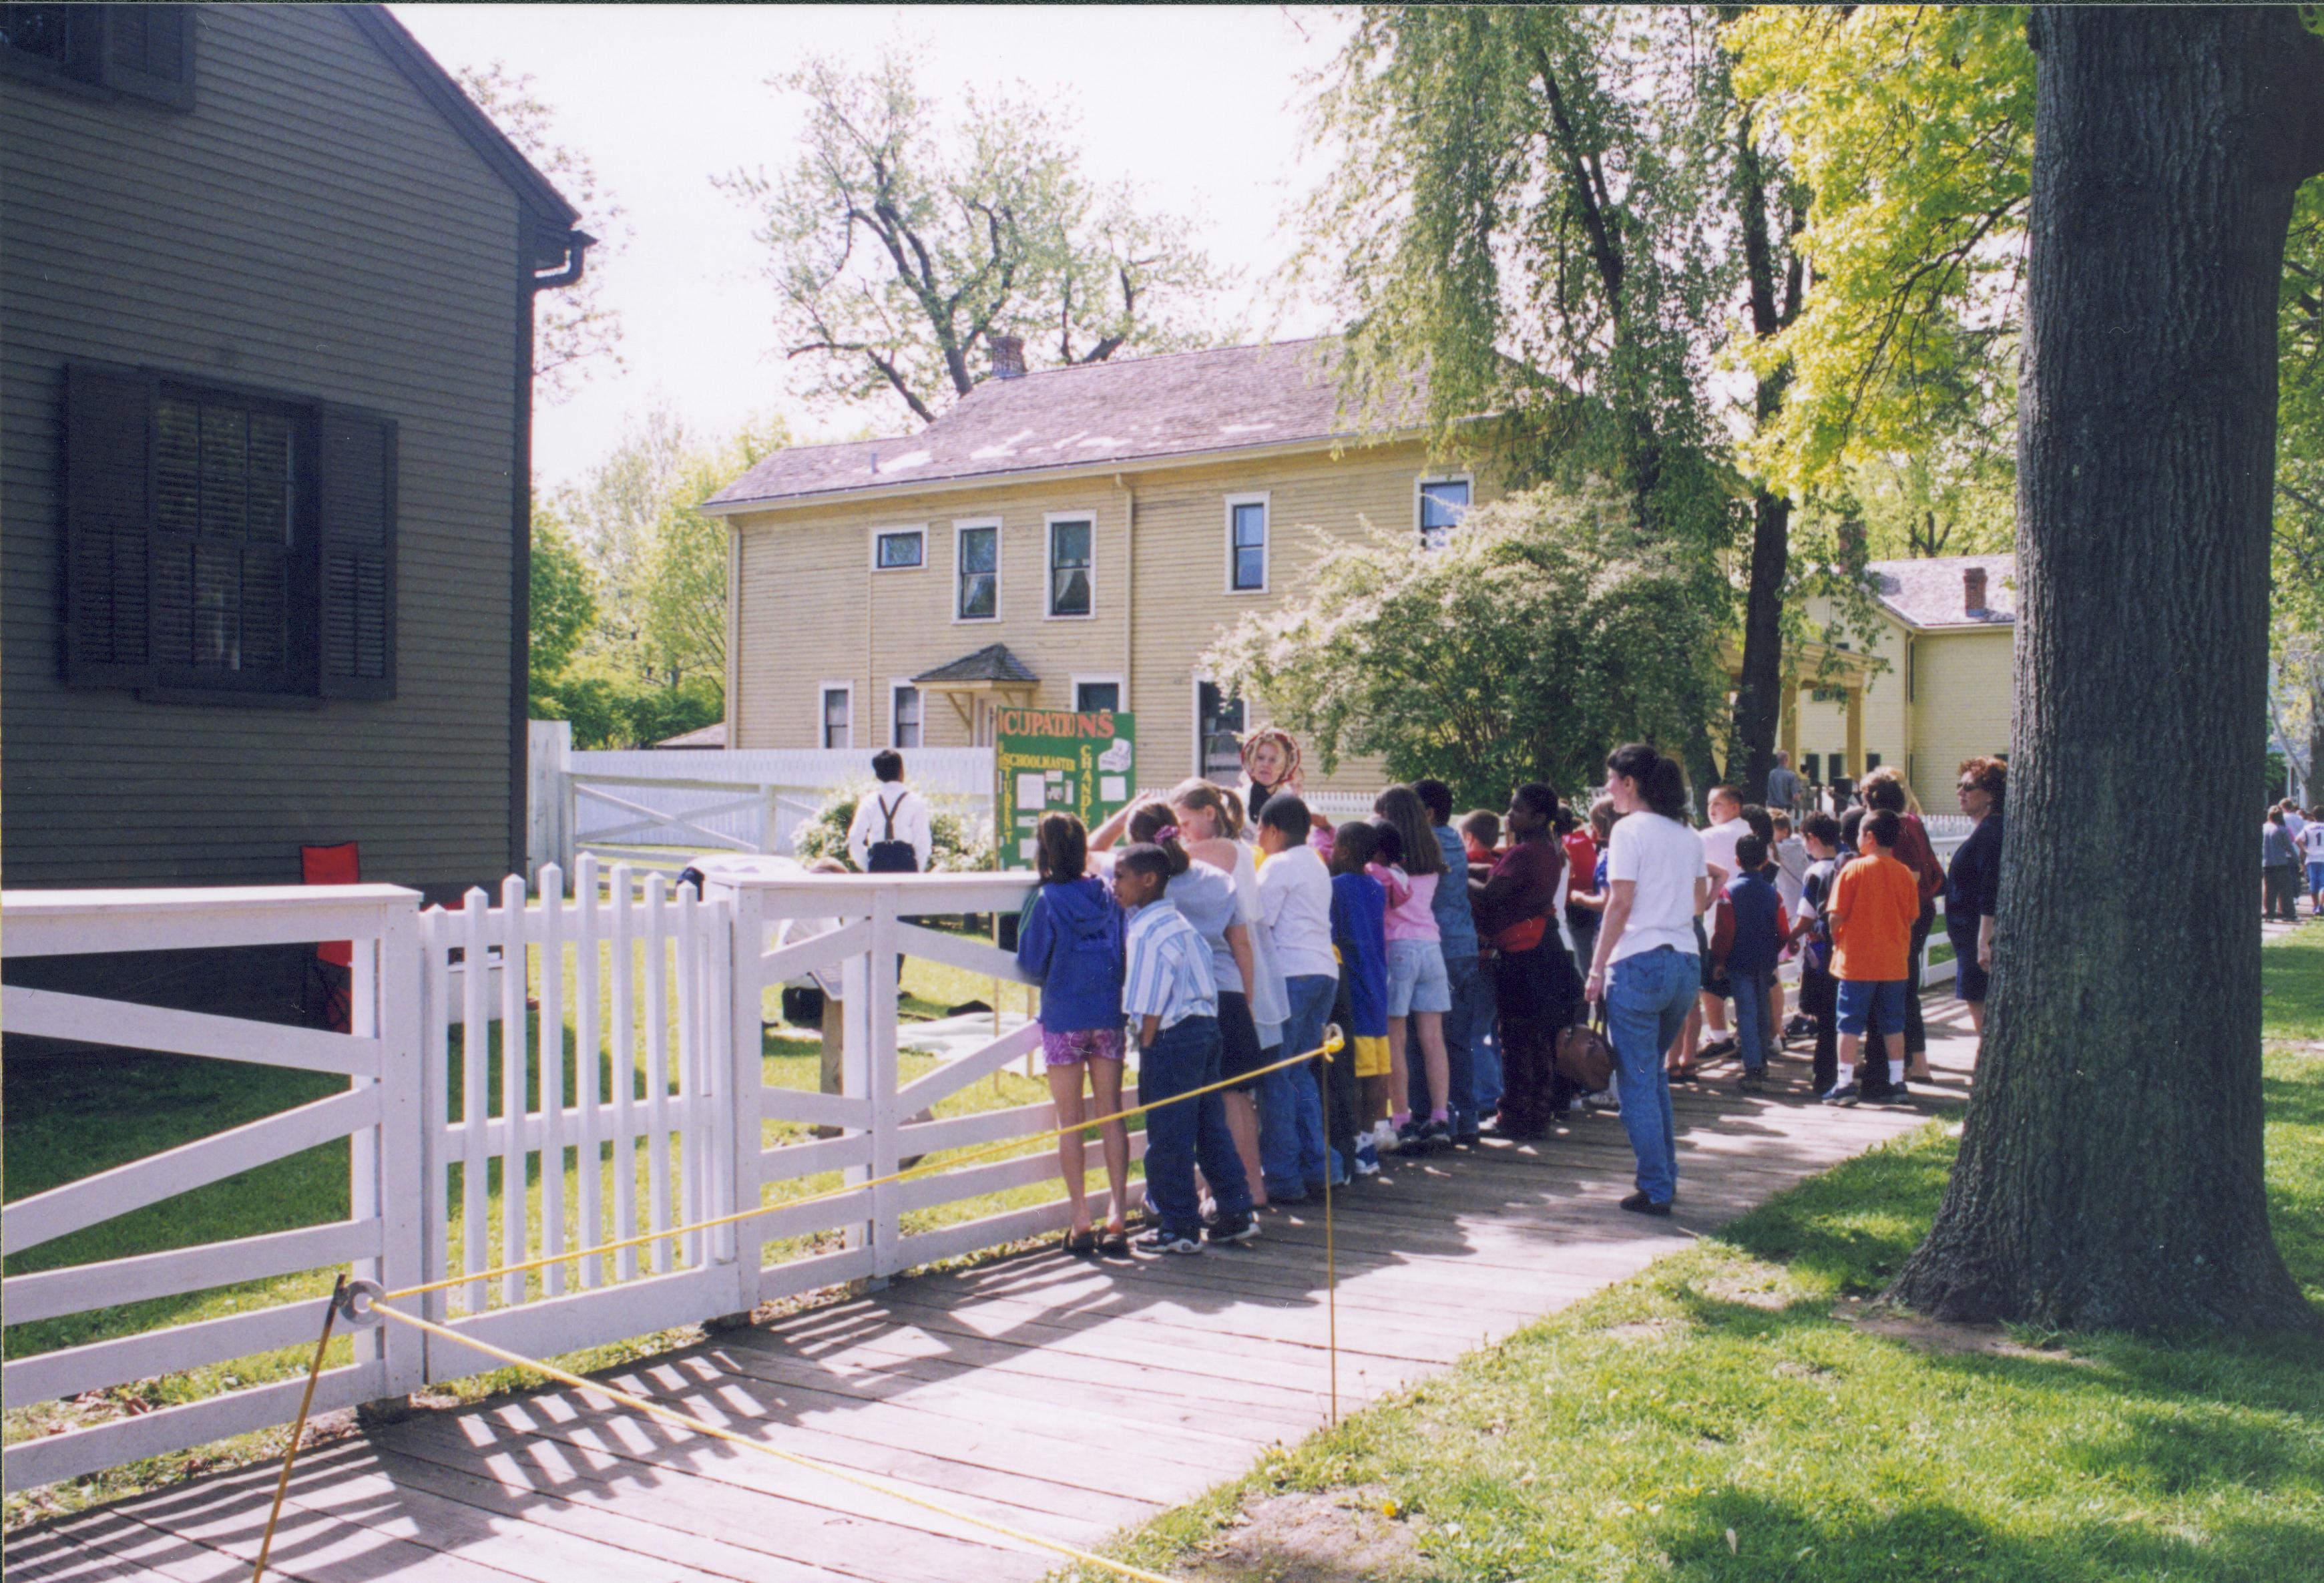 Dubois School Living History program - students portray different occupations from the 19th century in Arnold house yard while a school group and parents watch.  Arnold House on left. Cook and Robinson Houses in background center and right. Looking Southeast from 8th and Jackson Street intersection Dubois School, living history, Arnold, Cook, Robinson, students, school groups, 